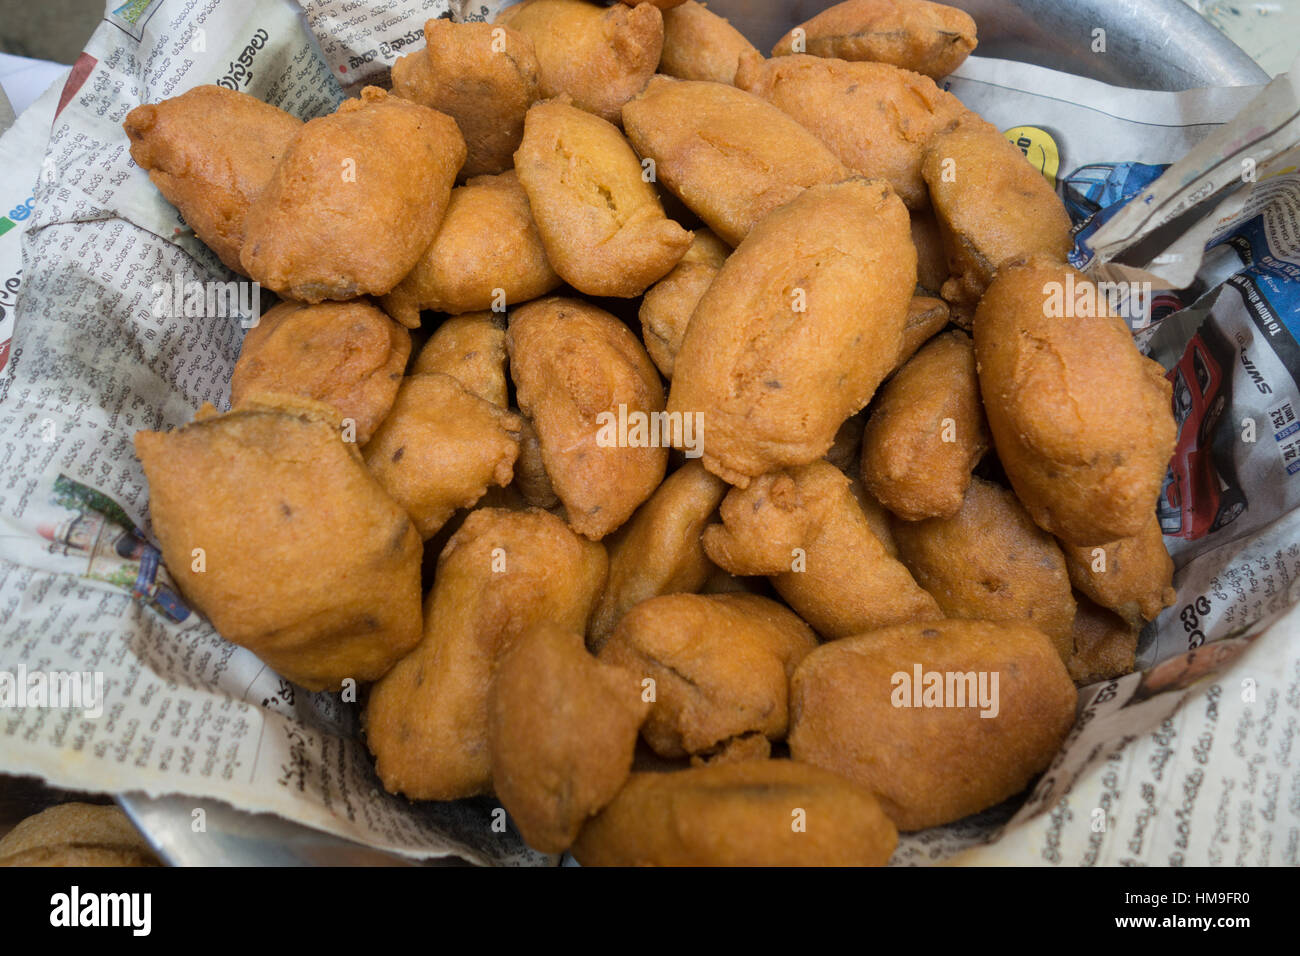 Sliced potato coated with gram flour batter and deep fried.Popular street food of India Stock Photo